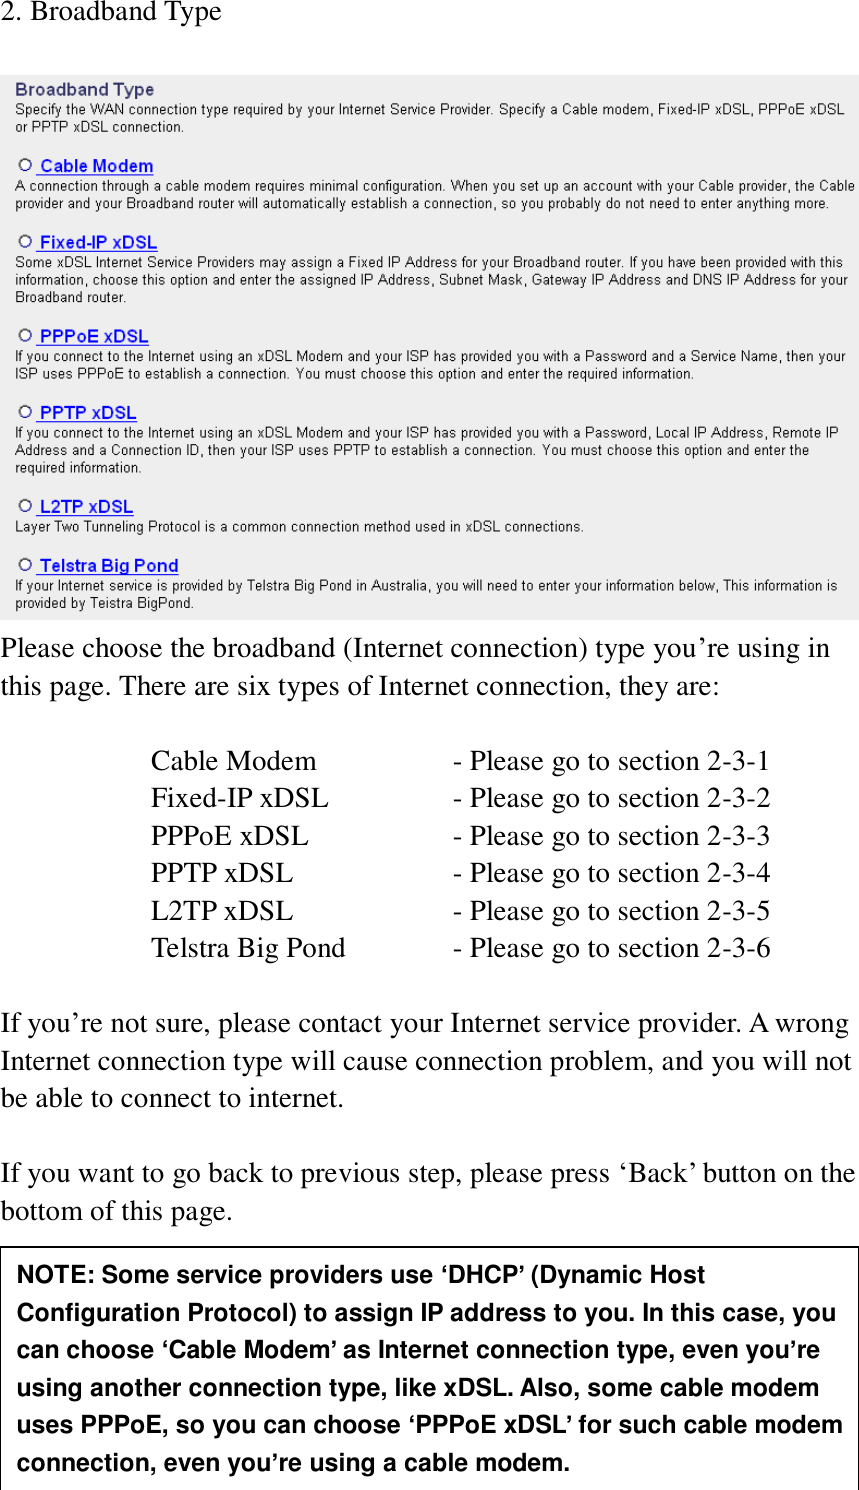 24 2. Broadband Type   Please choose the broadband (Internet connection) type you‟re using in this page. There are six types of Internet connection, they are:  Cable Modem      - Please go to section 2-3-1 Fixed-IP xDSL      - Please go to section 2-3-2 PPPoE xDSL      - Please go to section 2-3-3 PPTP xDSL       - Please go to section 2-3-4 L2TP xDSL       - Please go to section 2-3-5 Telstra Big Pond     - Please go to section 2-3-6  If you‟re not sure, please contact your Internet service provider. A wrong Internet connection type will cause connection problem, and you will not be able to connect to internet.  If you want to go back to previous step, please press „Back‟ button on the bottom of this page.      NOTE: Some service providers use ‘DHCP’ (Dynamic Host Configuration Protocol) to assign IP address to you. In this case, you can choose ‘Cable Modem’ as Internet connection type, even you’re using another connection type, like xDSL. Also, some cable modem uses PPPoE, so you can choose ‘PPPoE xDSL’ for such cable modem connection, even you’re using a cable modem. 